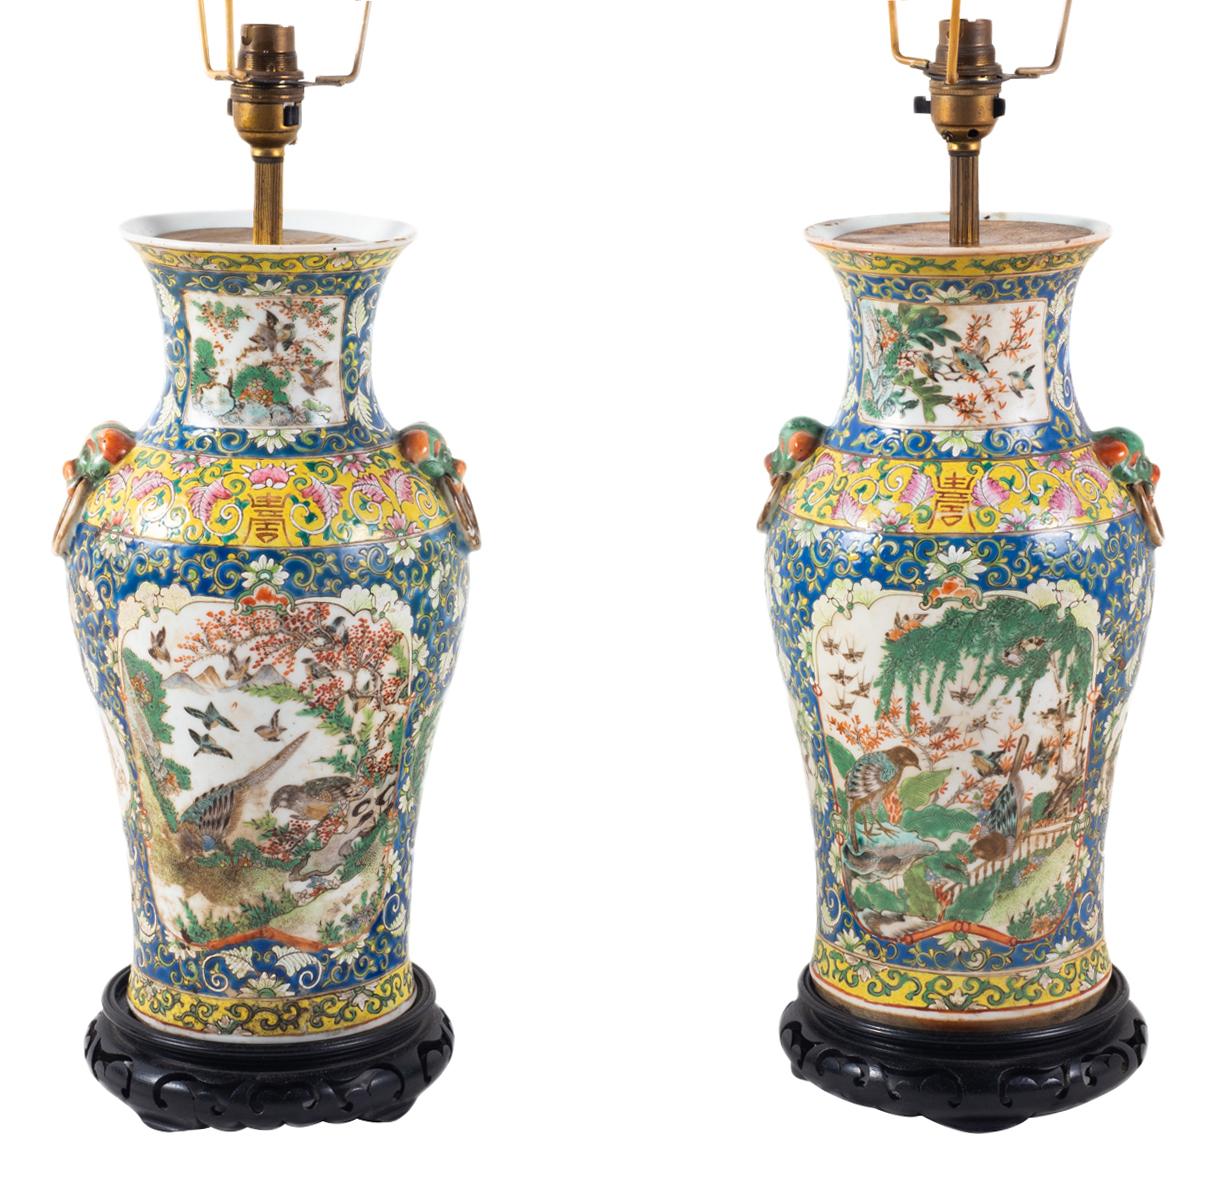 A very good quality pair of 19th Century Chinese Cantonese vases, having a blue and yellow ground with classical motif and scrolling foliate decoration around inset hand painted panels depicting exotic birds and trees, each with dog of foe mask and